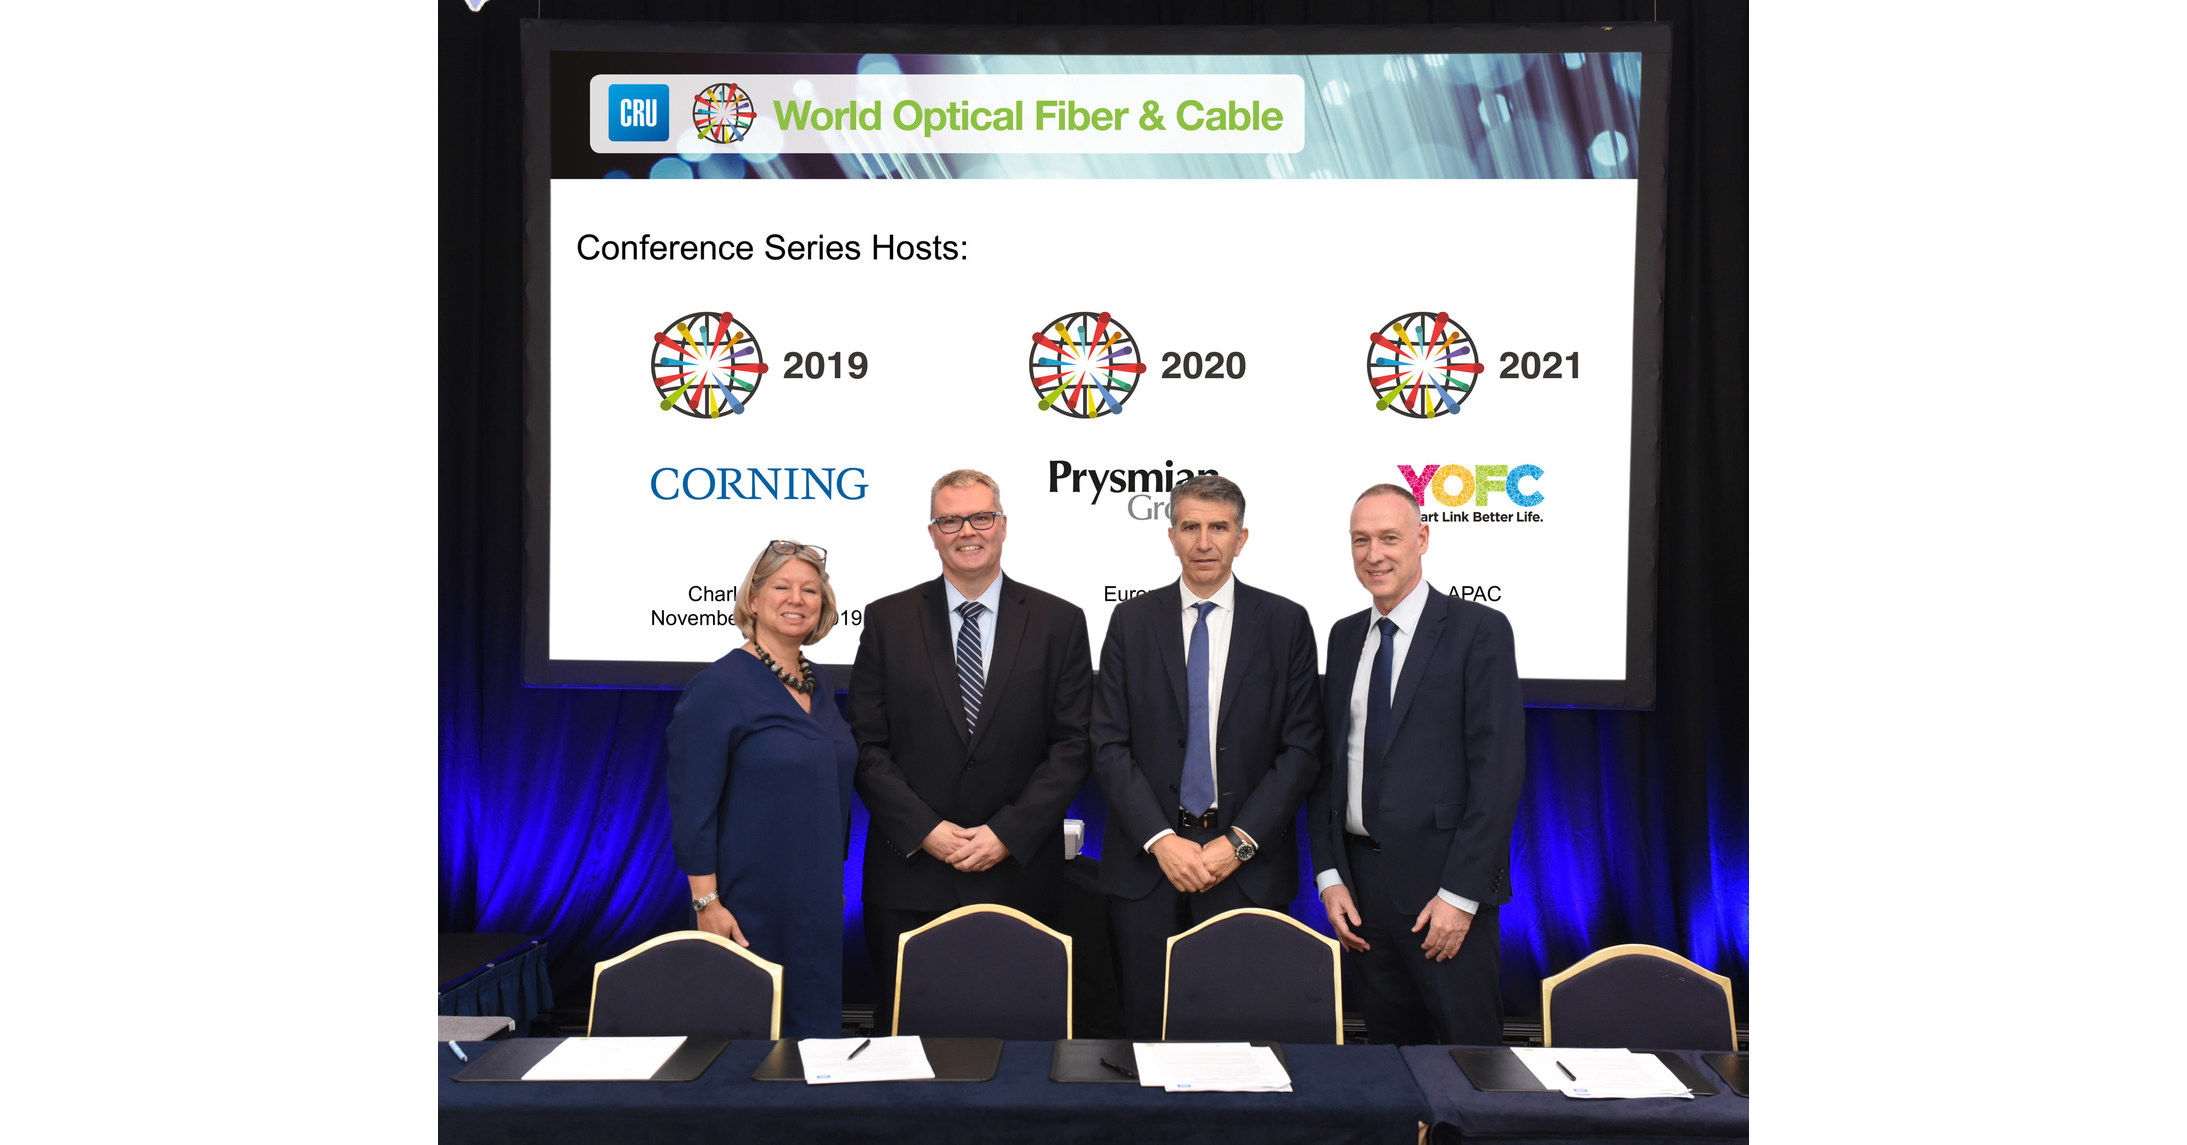 Corning Incorporated to Host the CRU World Optical Fiber & Cable